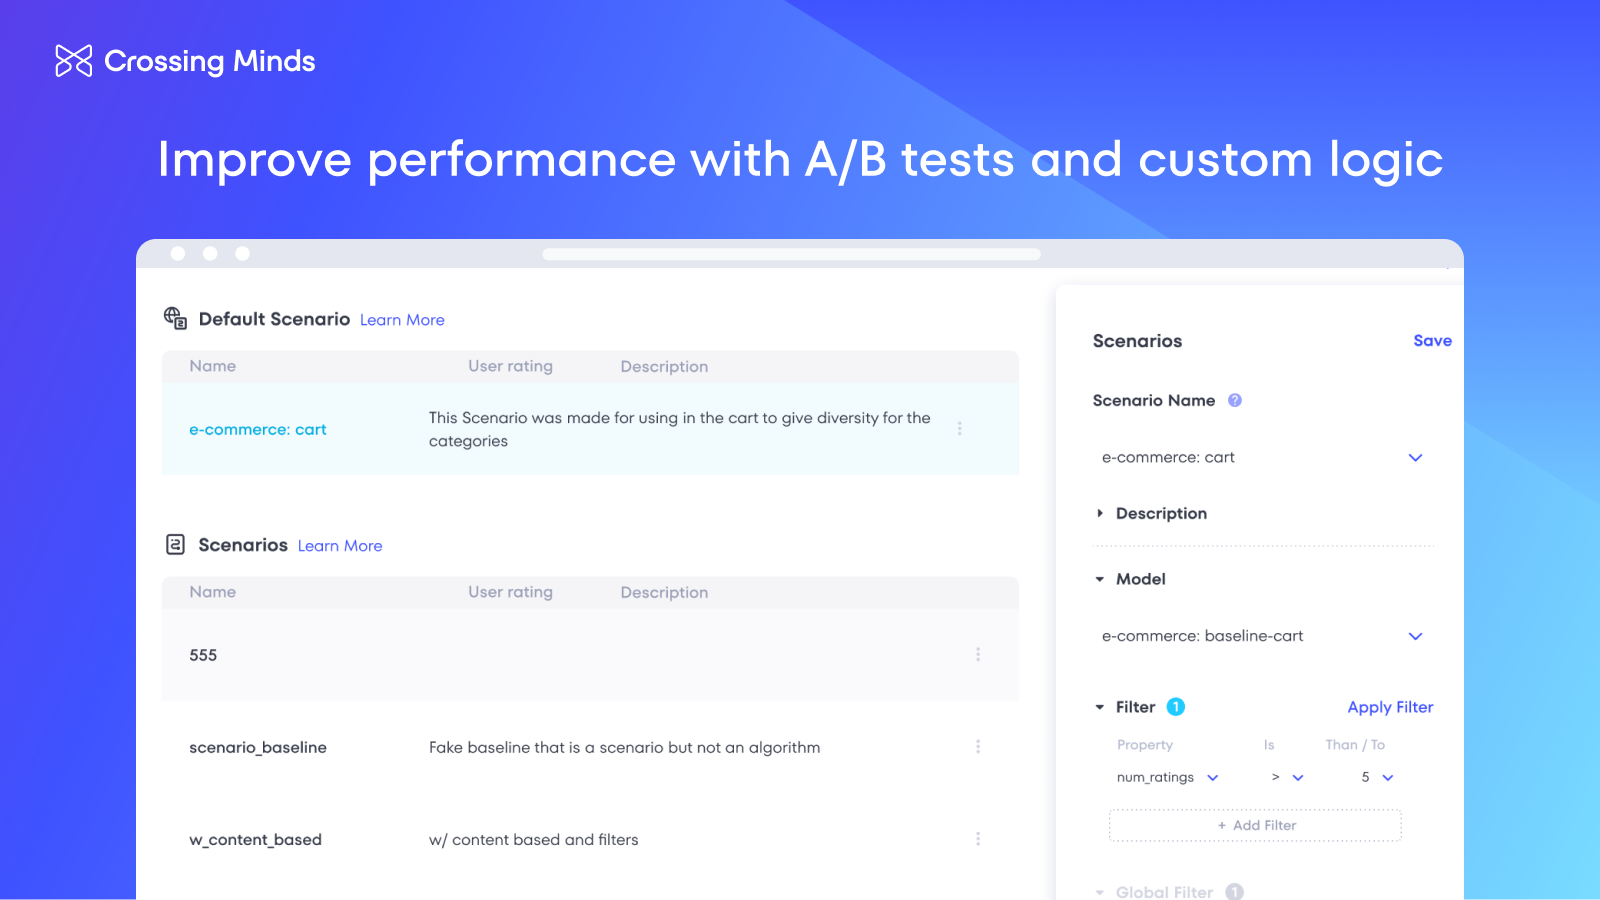 Improve performance with A/B tests and custom logic